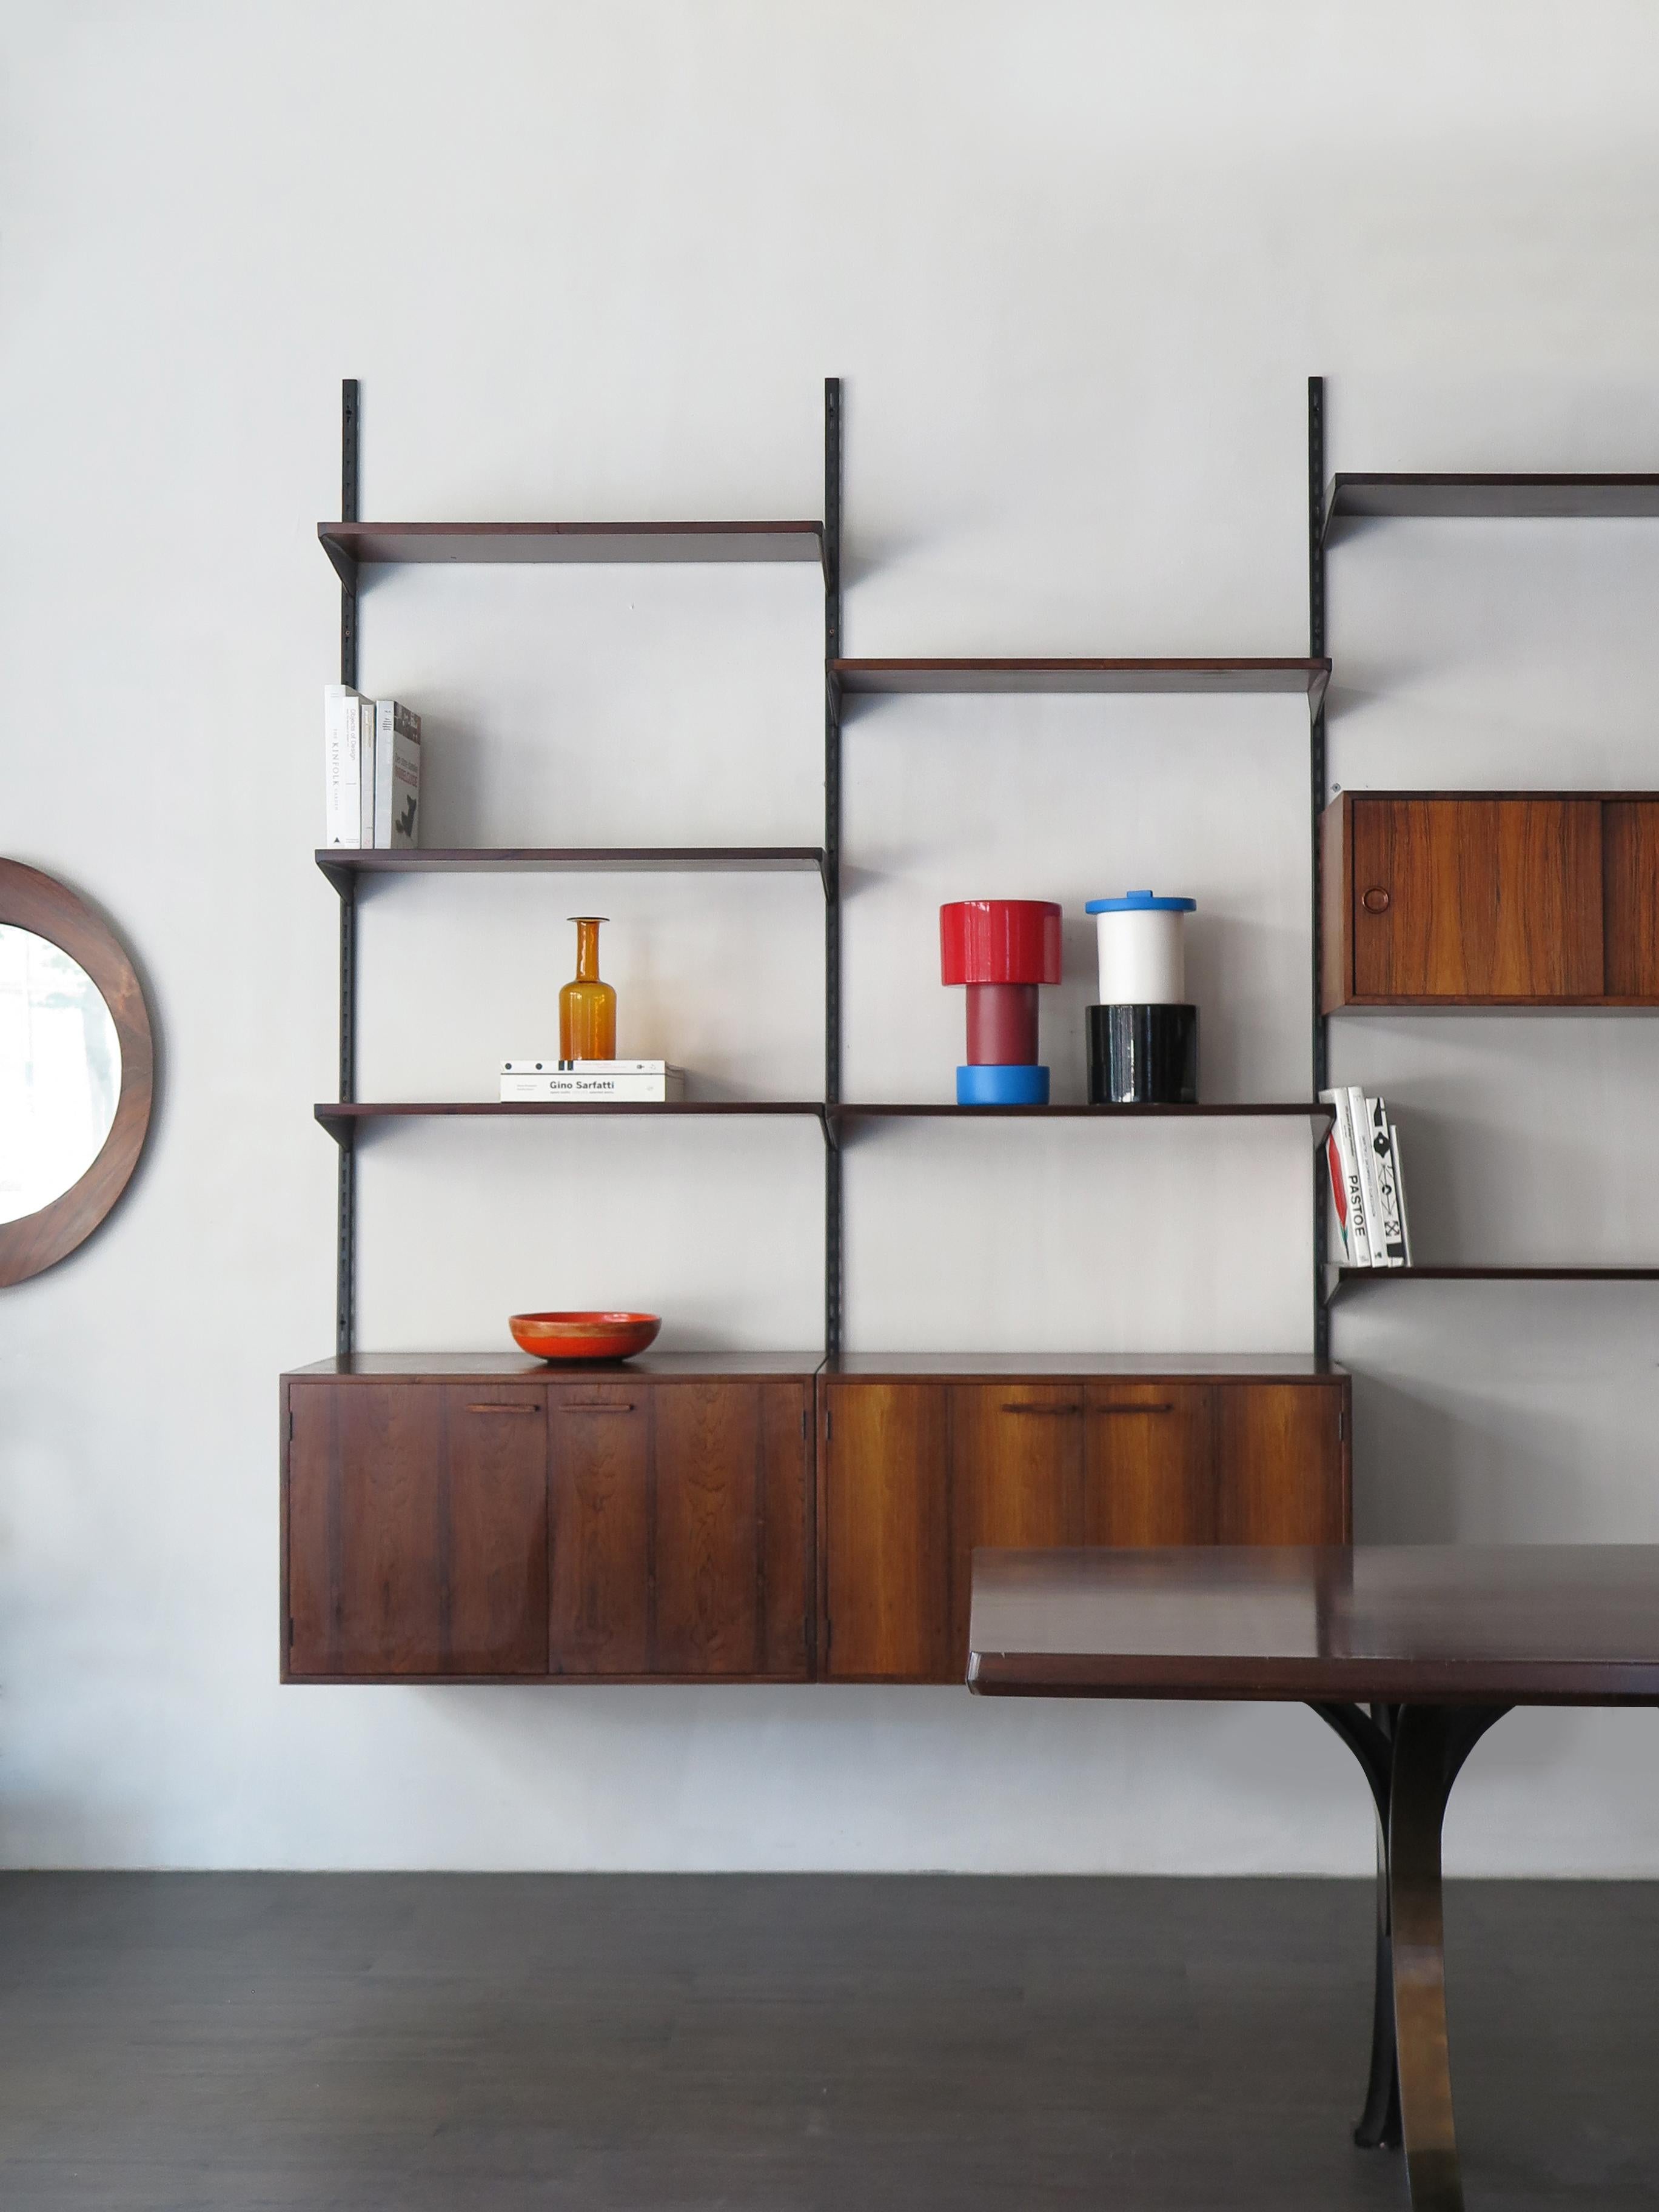 Scandinavian dark wood shelving system designed by Danish designer Kai Kristiansen for FM Mobler, wood box and shelves can be positioned as desired; manufacture label., circa 1960.

Please note that the item is original of the period and this